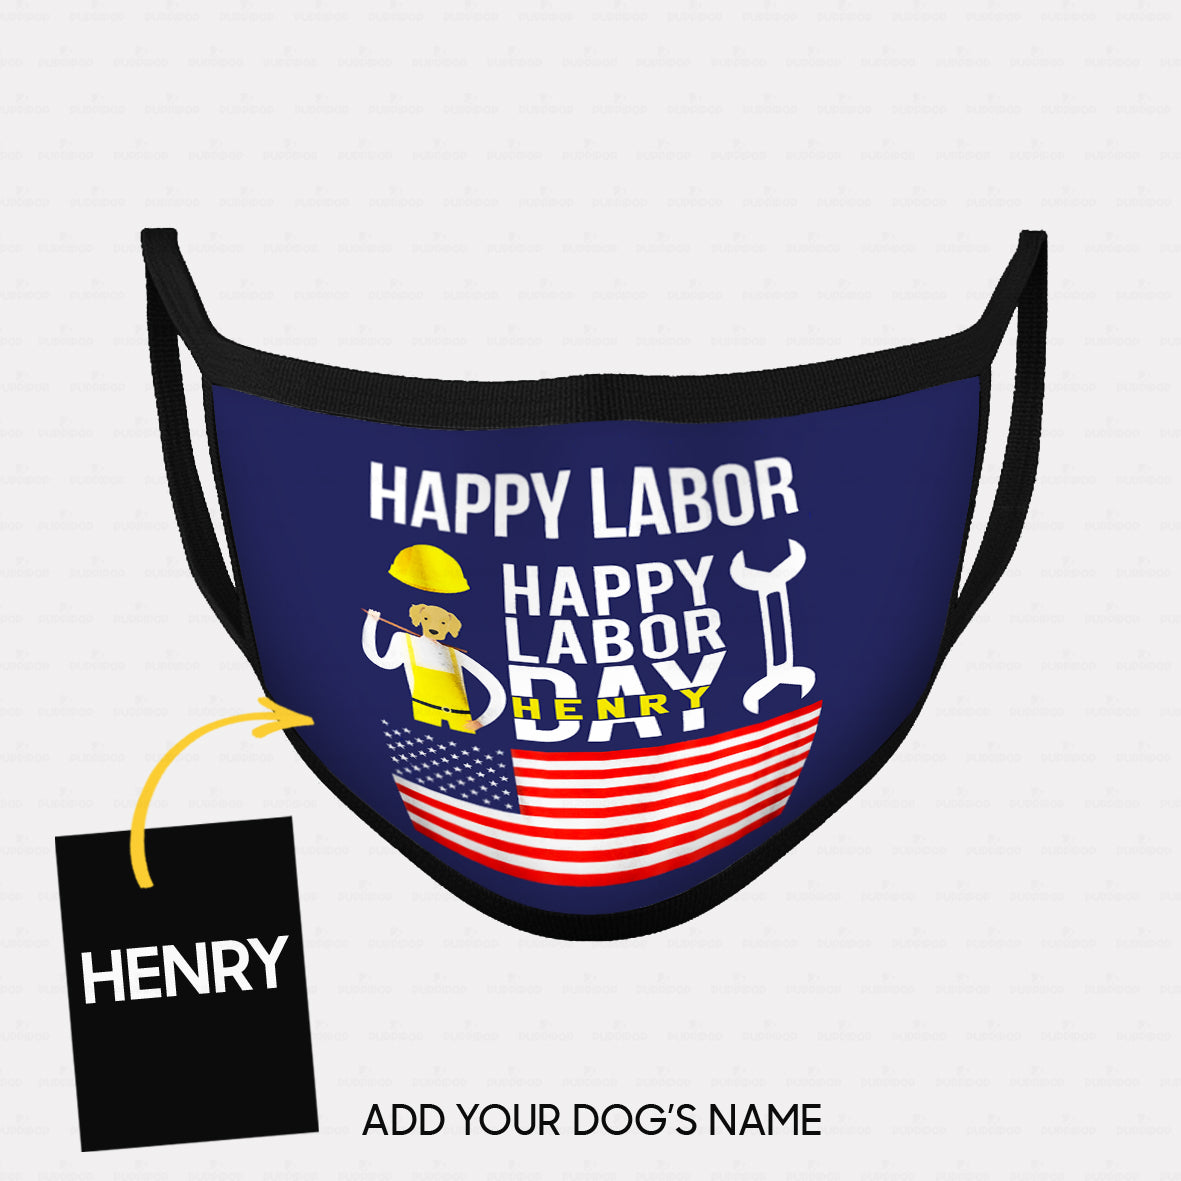 Personalized Dog Mask Gift Idea - Happy Labor Happy Labour Day For Dog Lovers - Cloth Mask